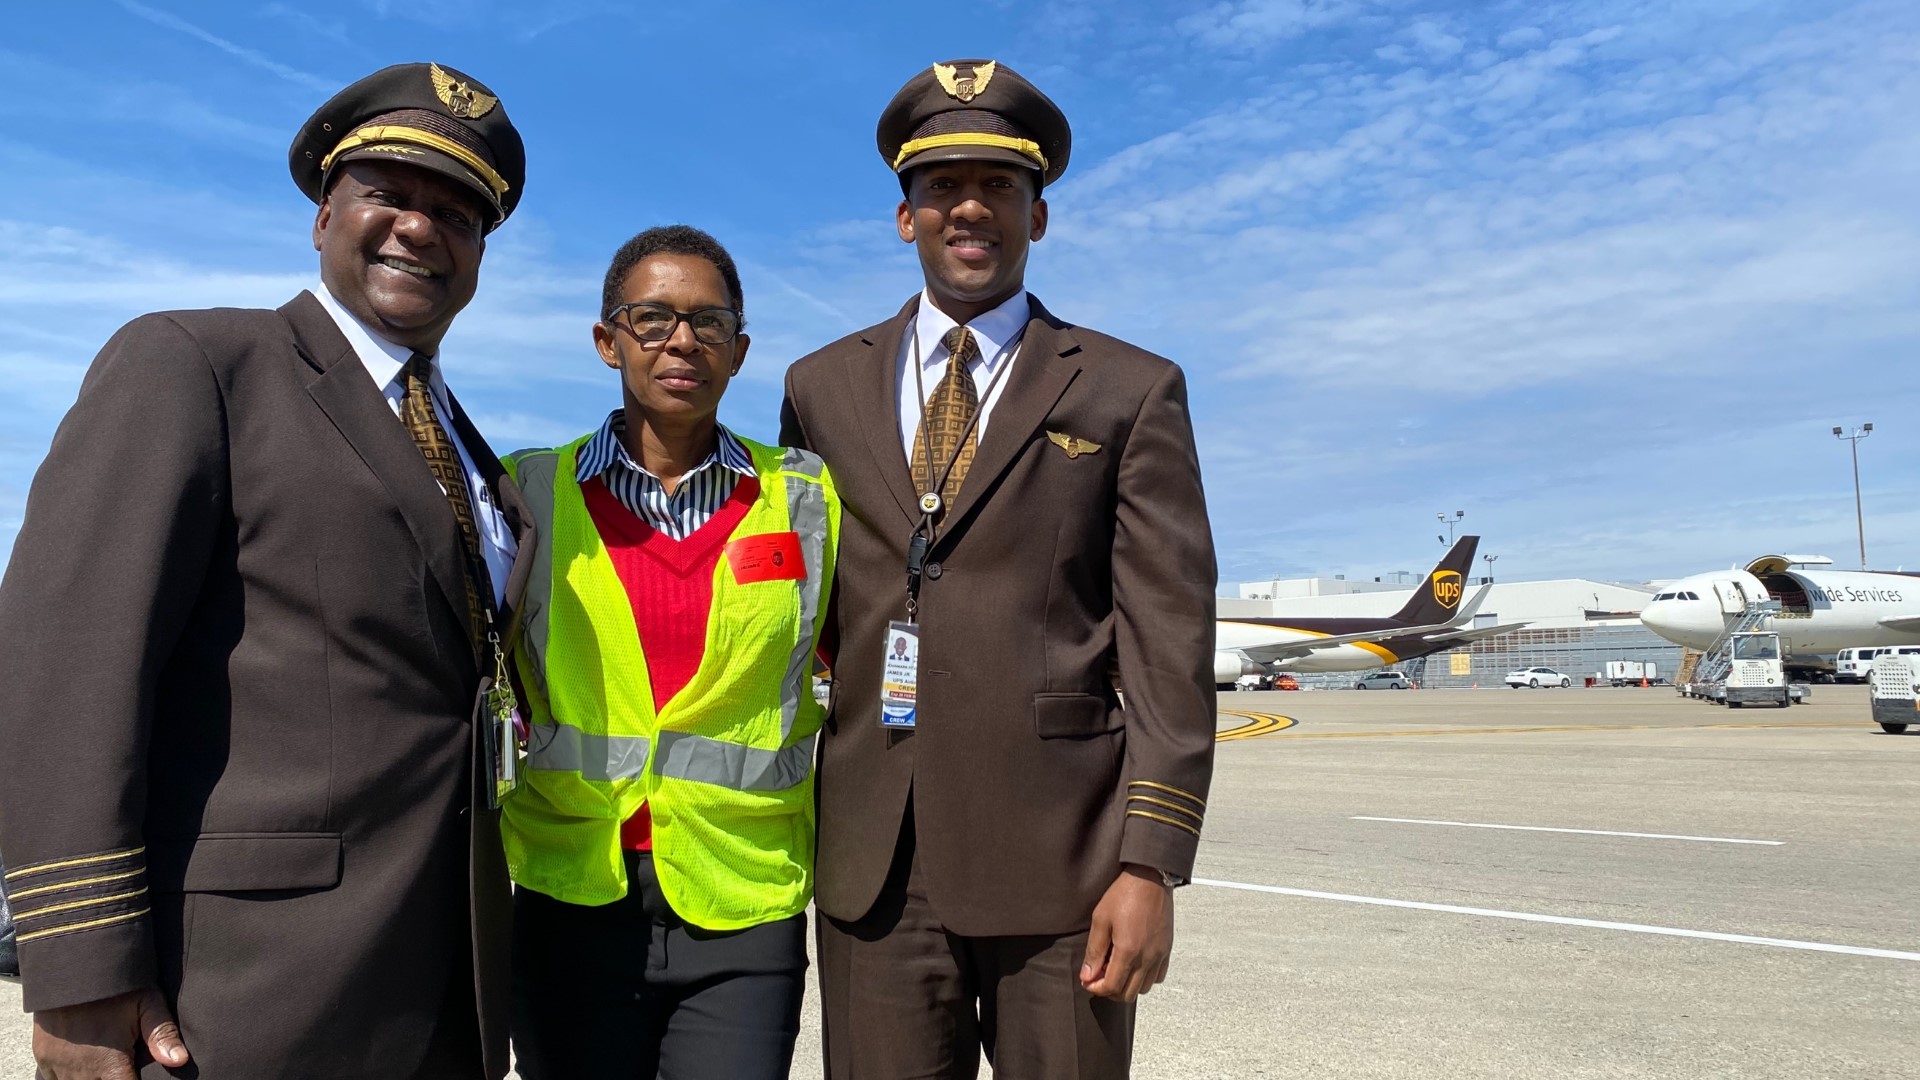 Capt. John James went above and beyond inspiring his son to become a pilot. First Officer Johnmark James Jr. says his dad has been preparing him his whole life.